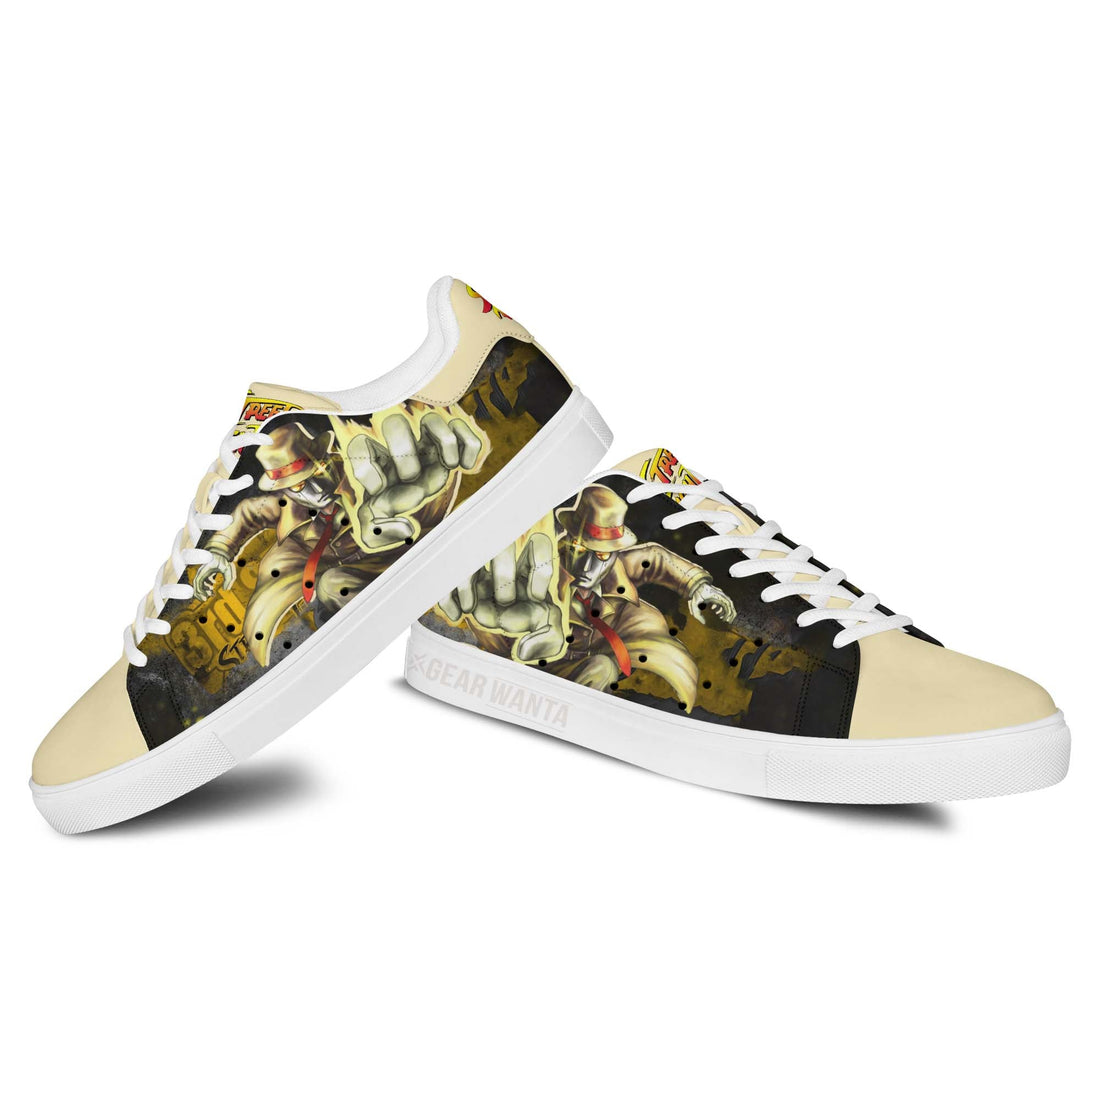 Q Stan Shoes Custom Street Fighter Game Shoes-Gear Wanta